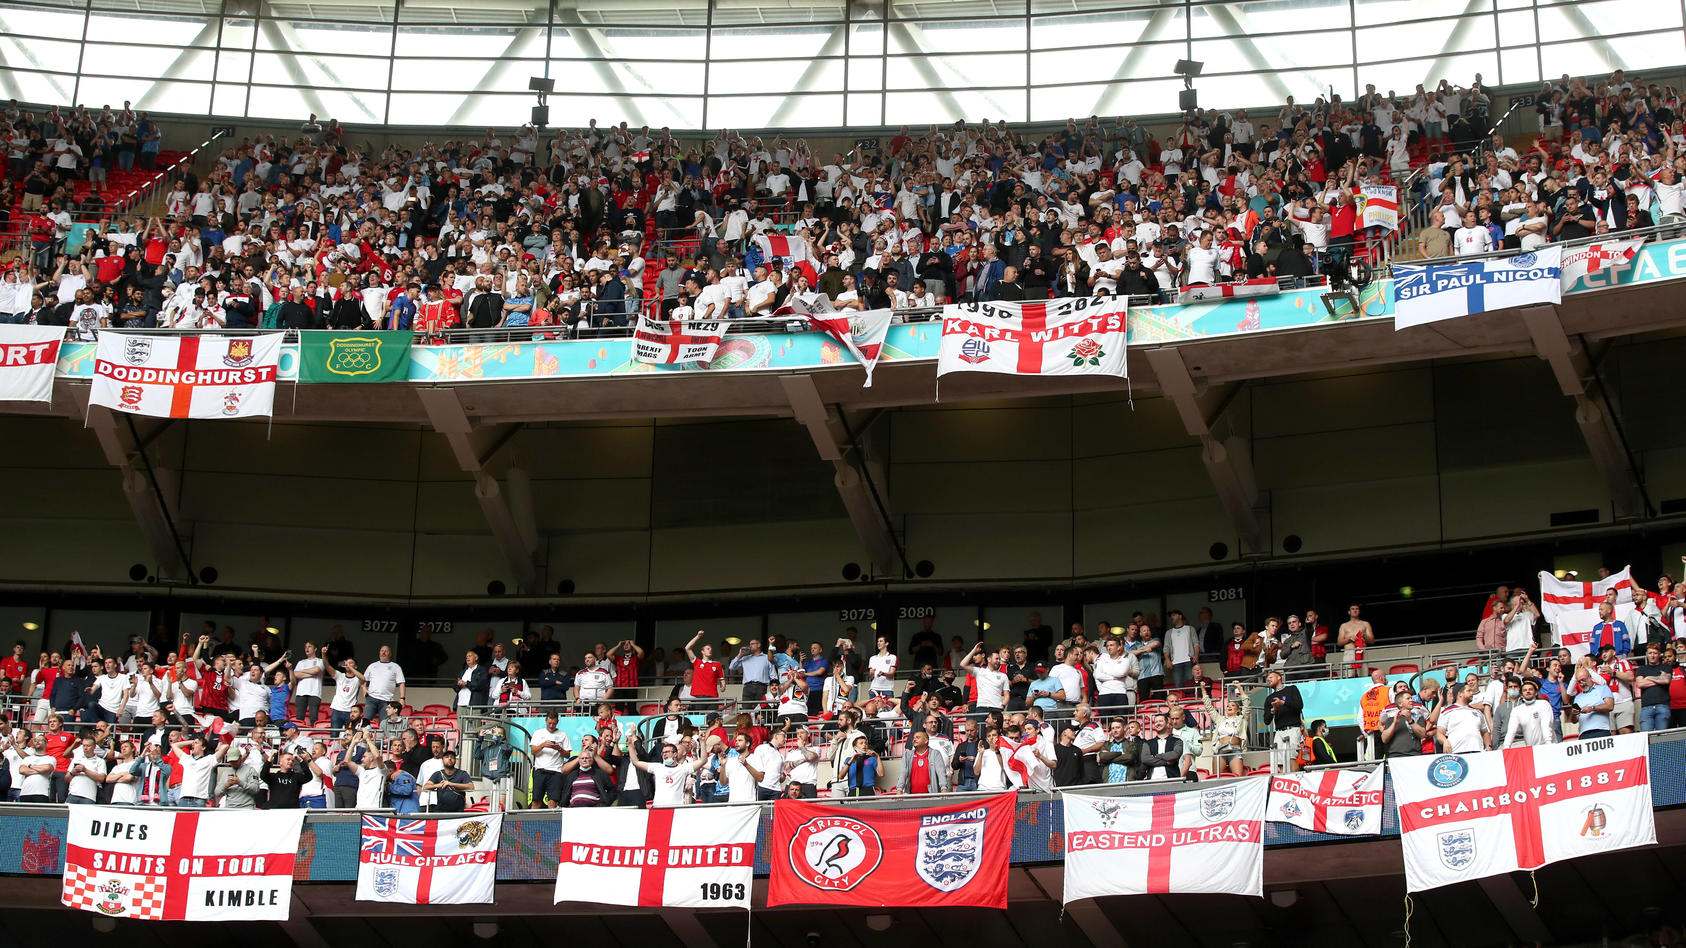 England v Germany - UEFA EURO, EM, Europameisterschaft,Fussball 2020 - Round of 16 - Wembley Stadium England fans show their support during the UEFA Euro 2020 round of 16 match at Wembley Stadium, London. Picture date: Tuesday June 29, 2021. Use subj